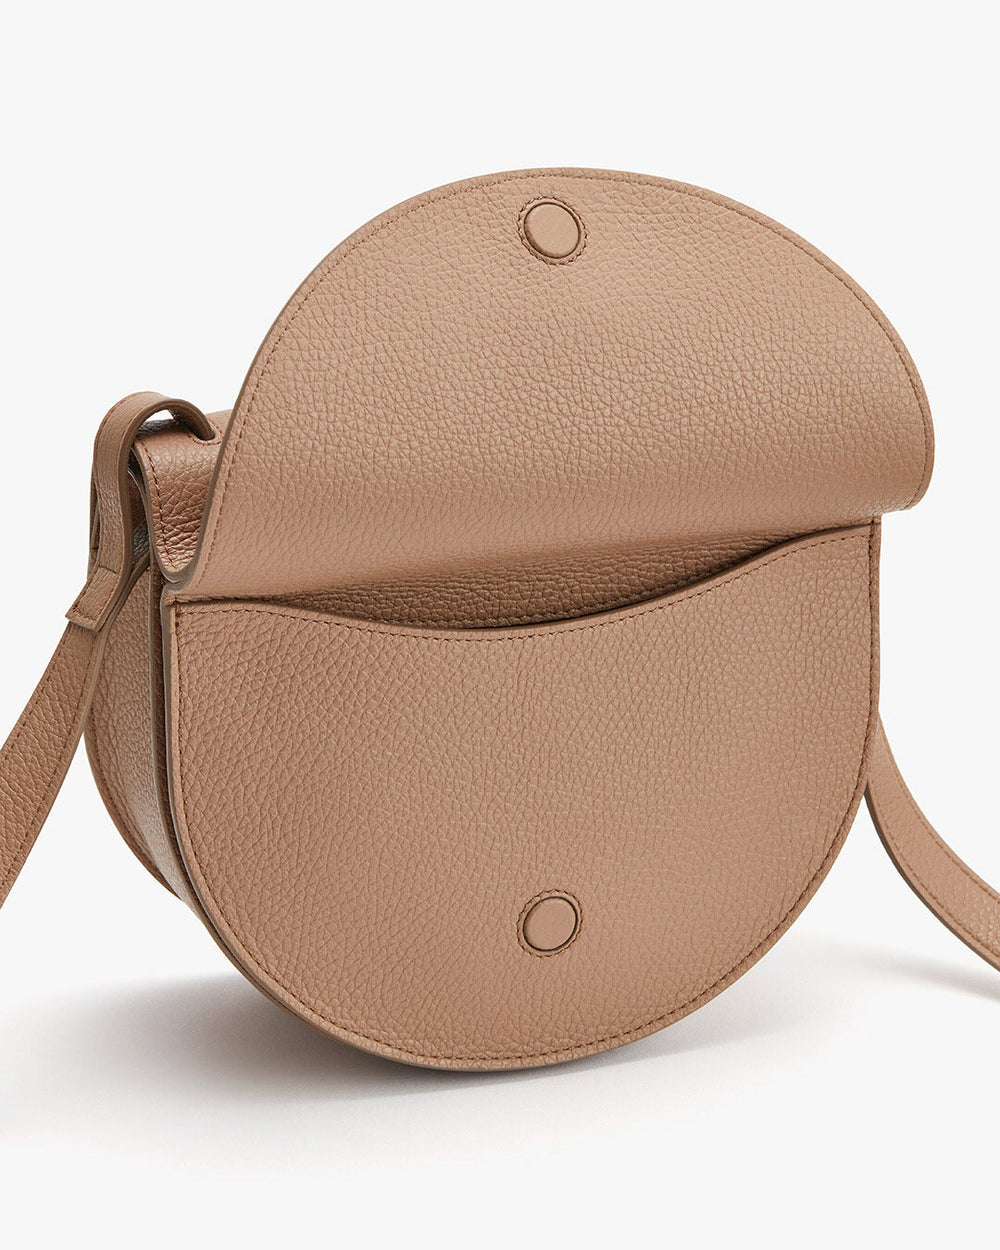 Round shoulder bag with a flap closure and an adjustable strap.